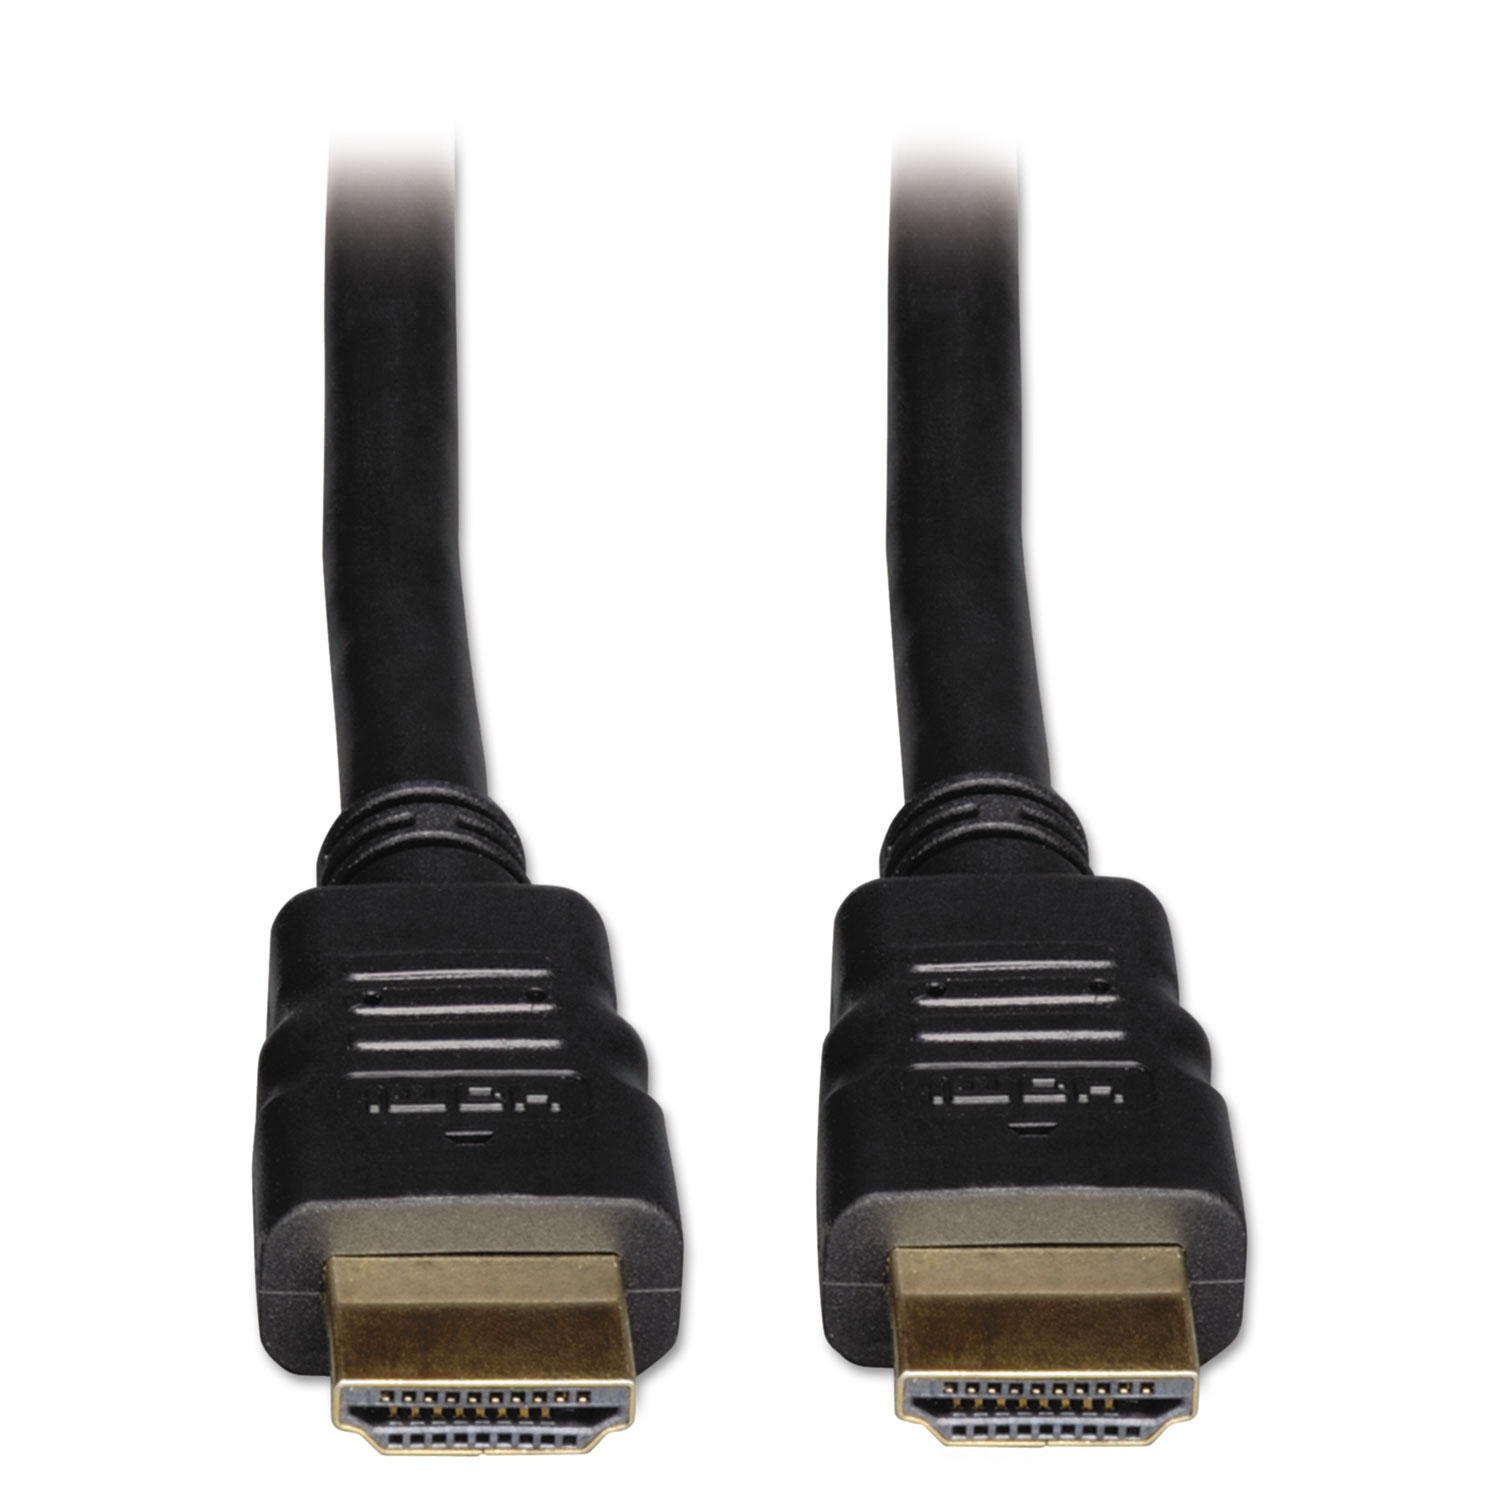  Tripp Lite P569-006 High Speed HDMI Cable with Ethernet, Ultra HD 4K x 2K, (M/M), 6 ft., Black (TRPP569006) 